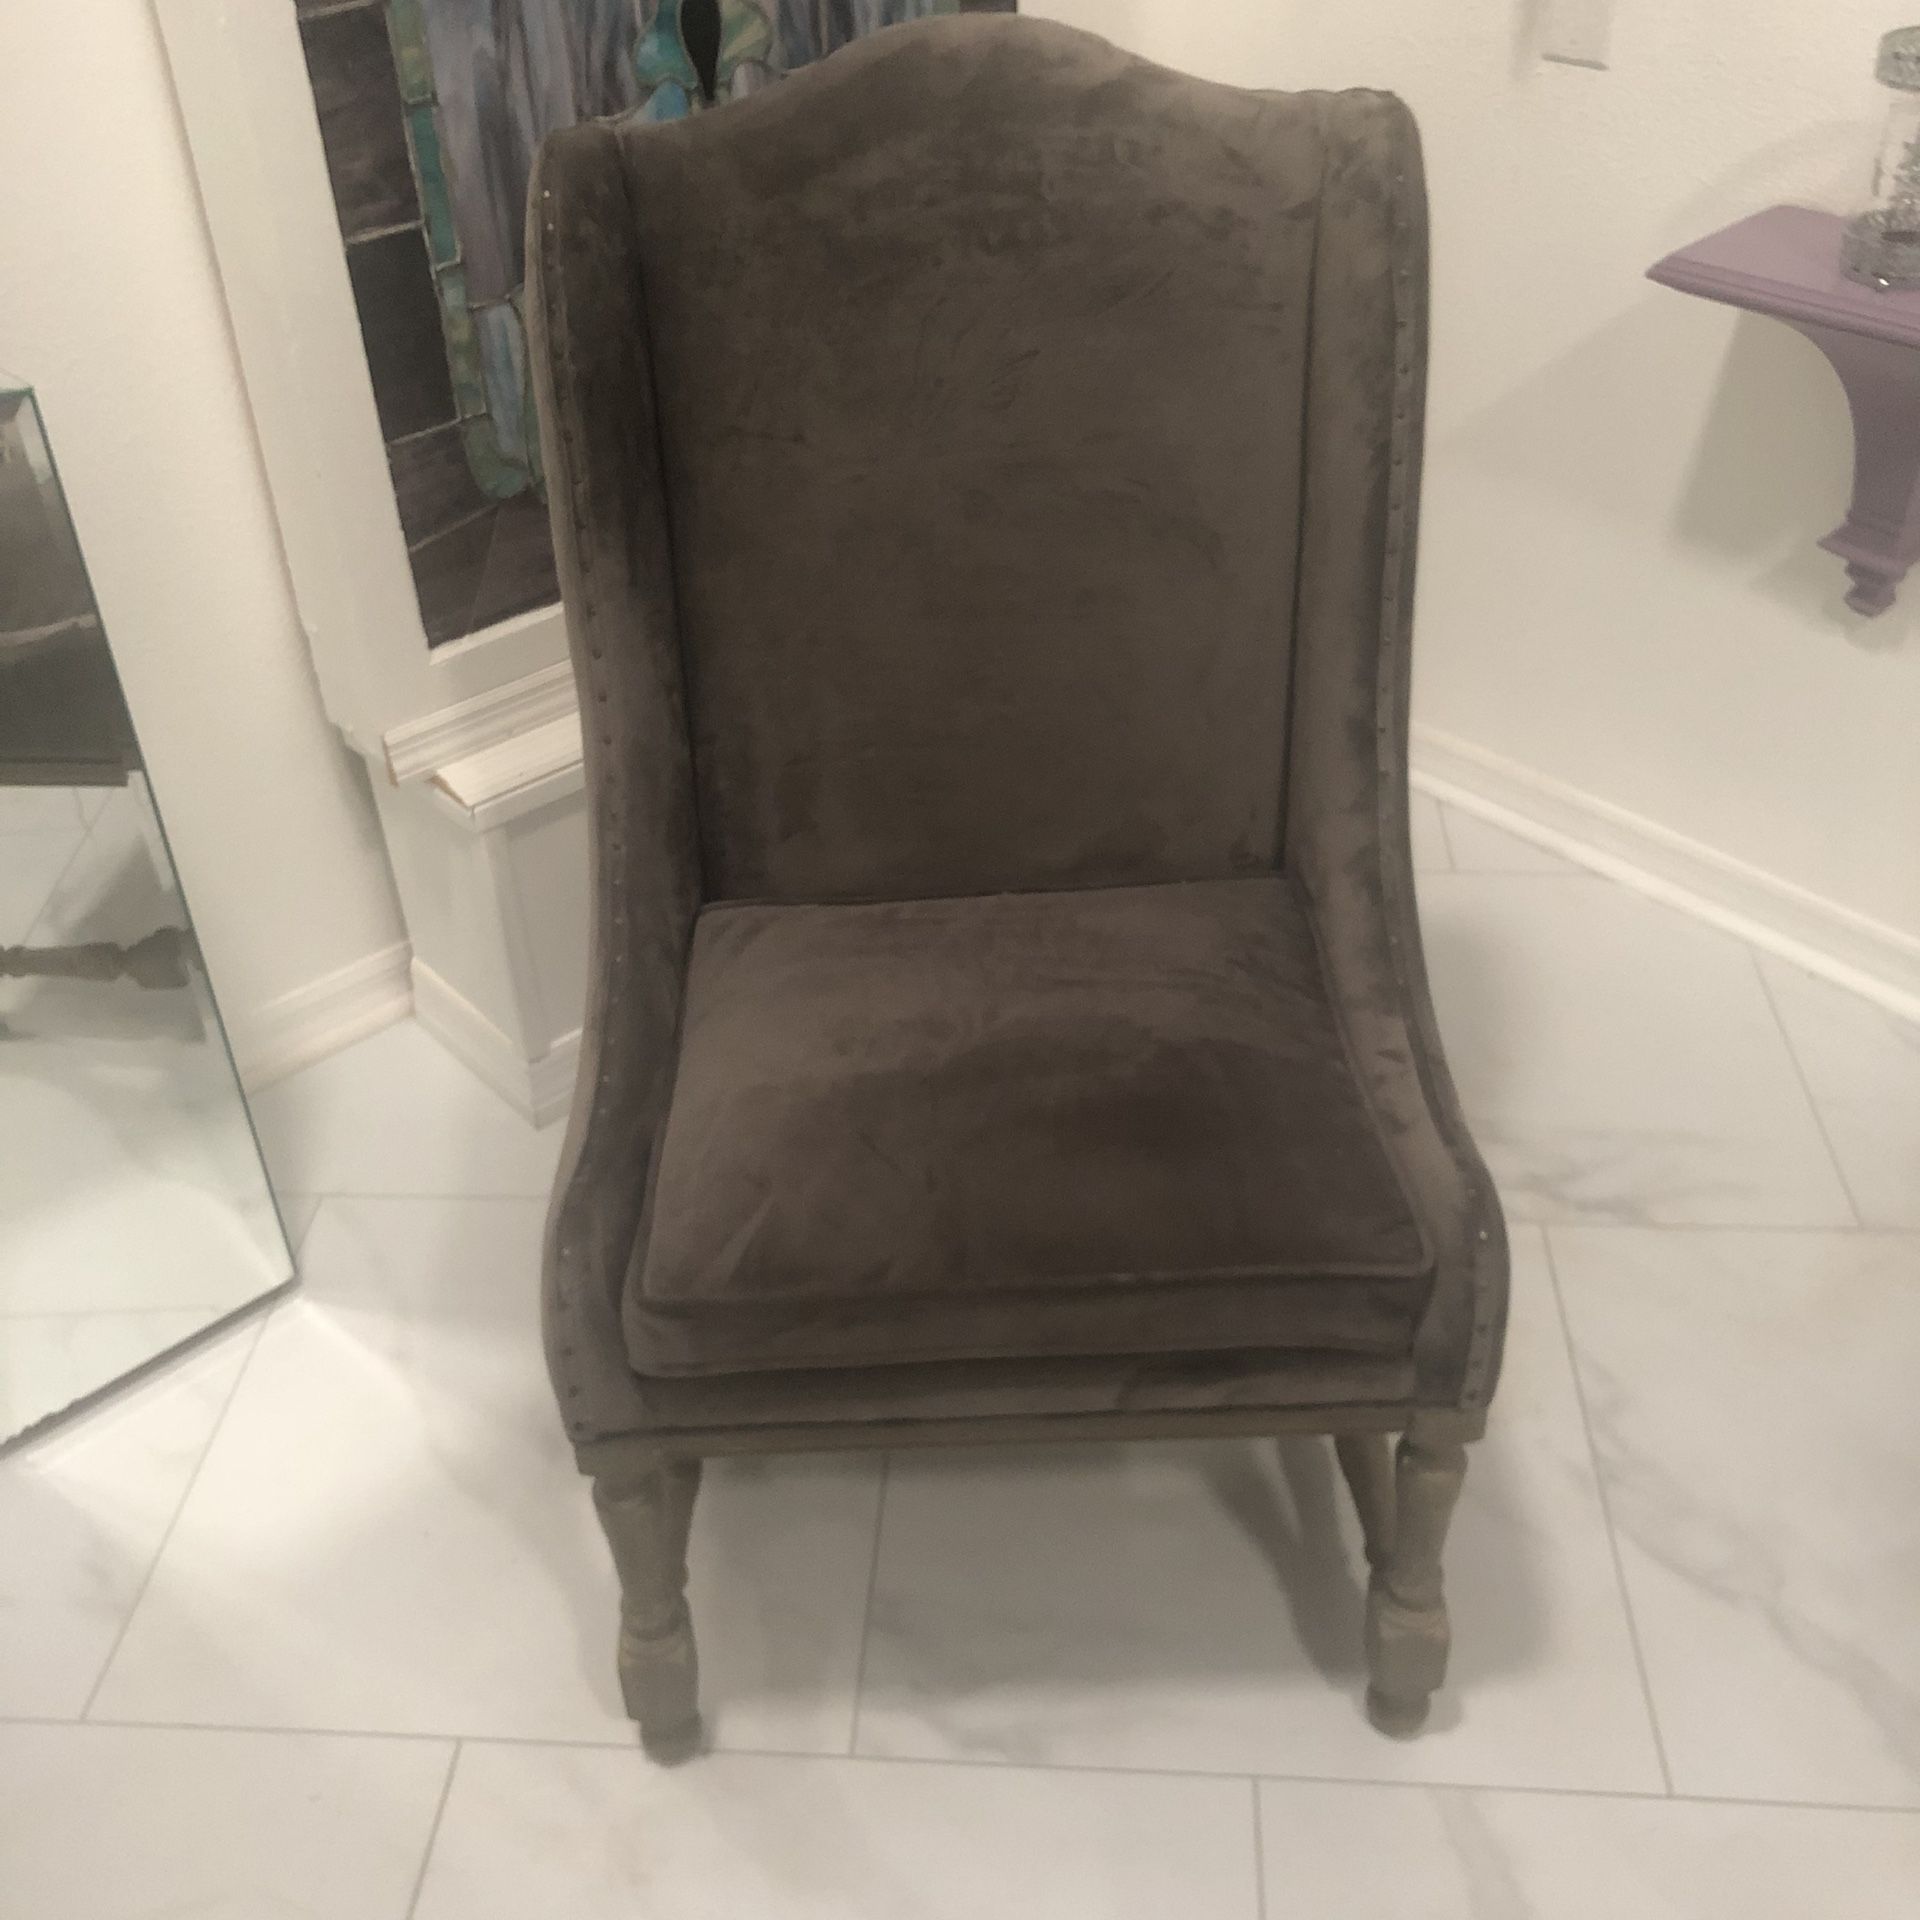  Chair Imported From Italy